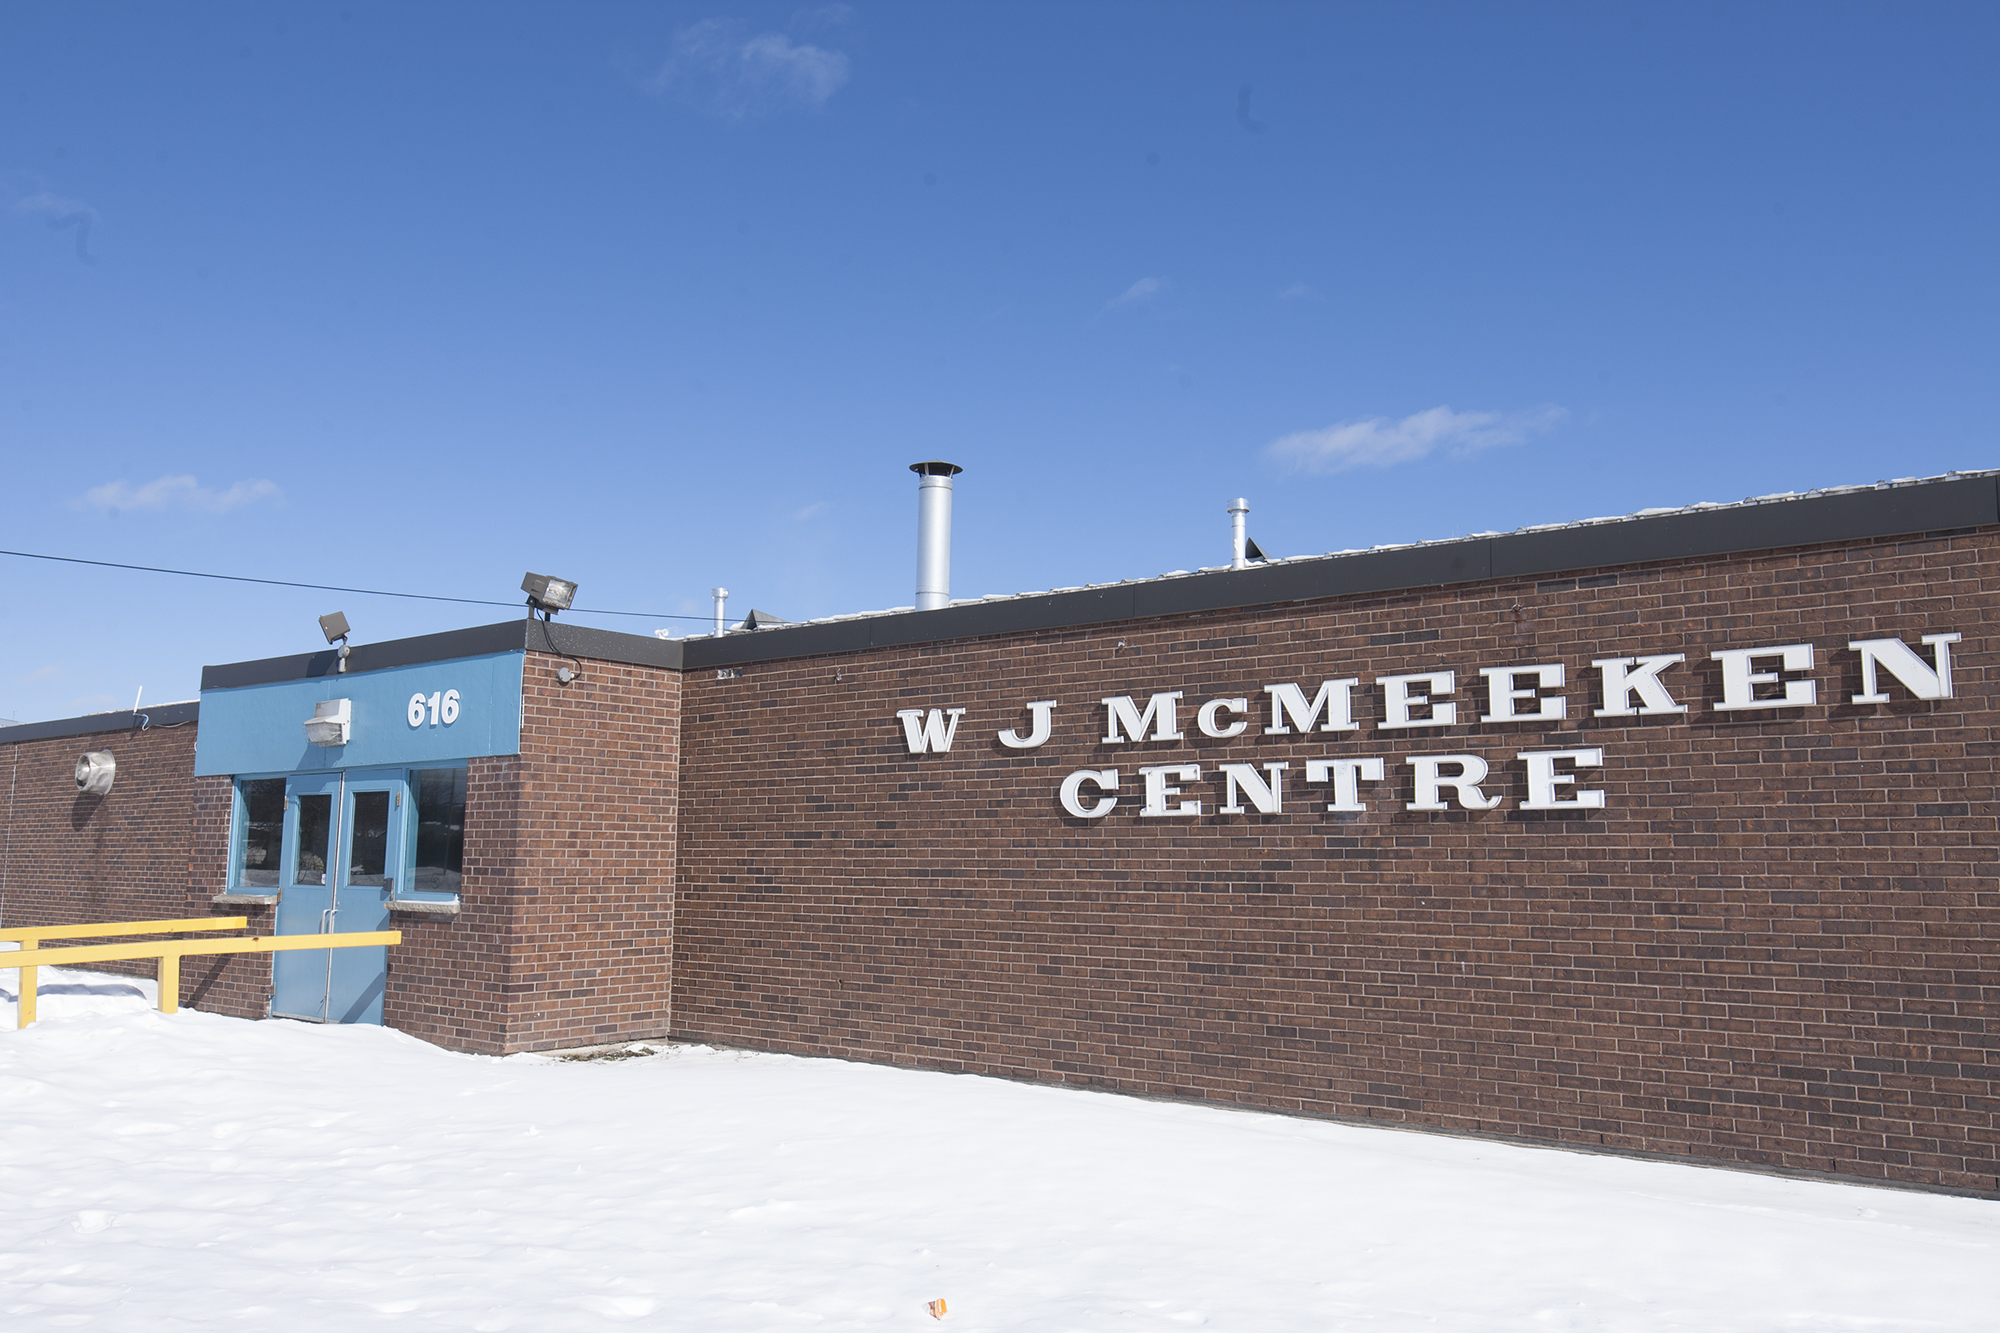 4 Ice Rinks you can't miss in Sault Ste. Marie - Sault Ste Marie CVB